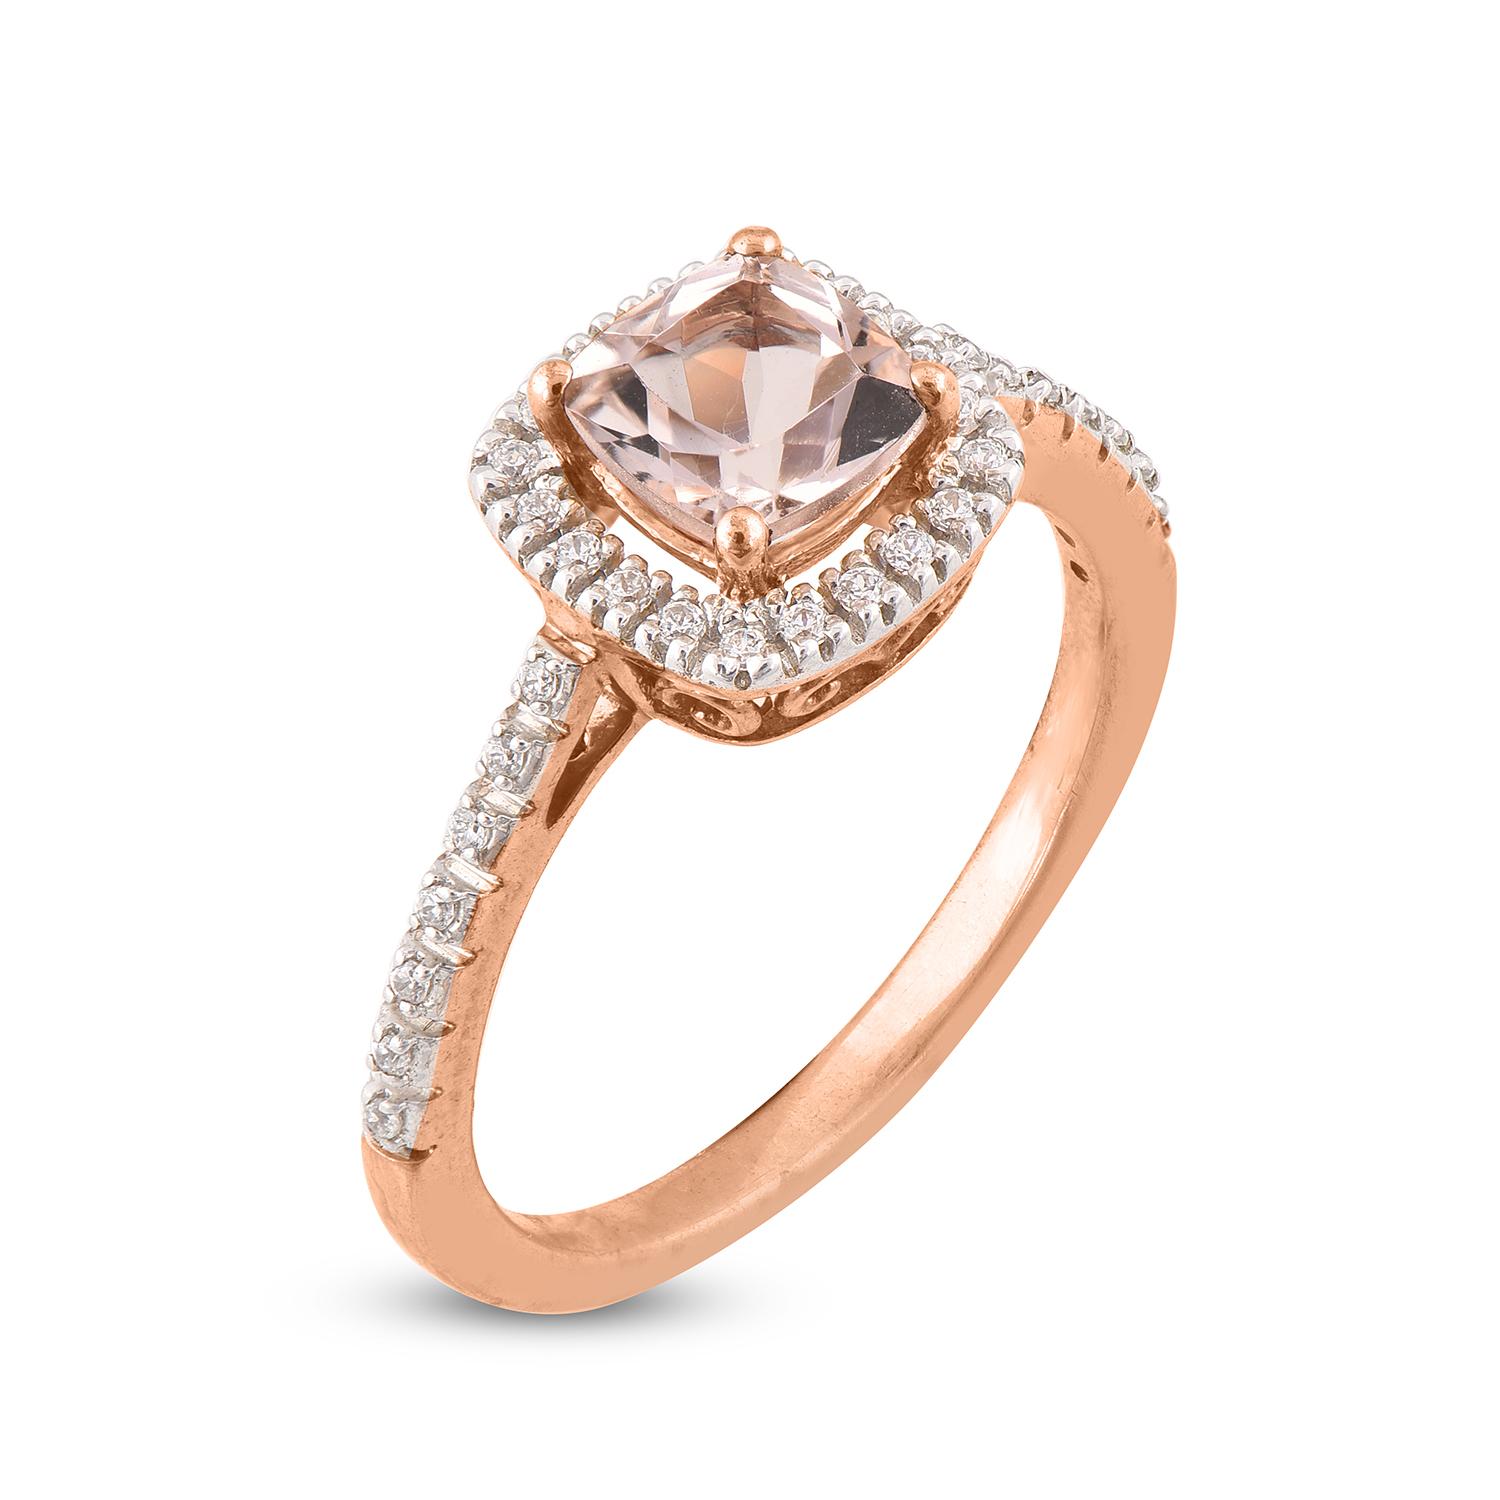 It’s easy to fall in love with this charming morganite engagement ring is crafted in 14 karat rose gold and studded with 34 natural diamonds and 1 natural morganite in pave and prong setting. Diamonds are graded HI color, I2 clarity. This comfort